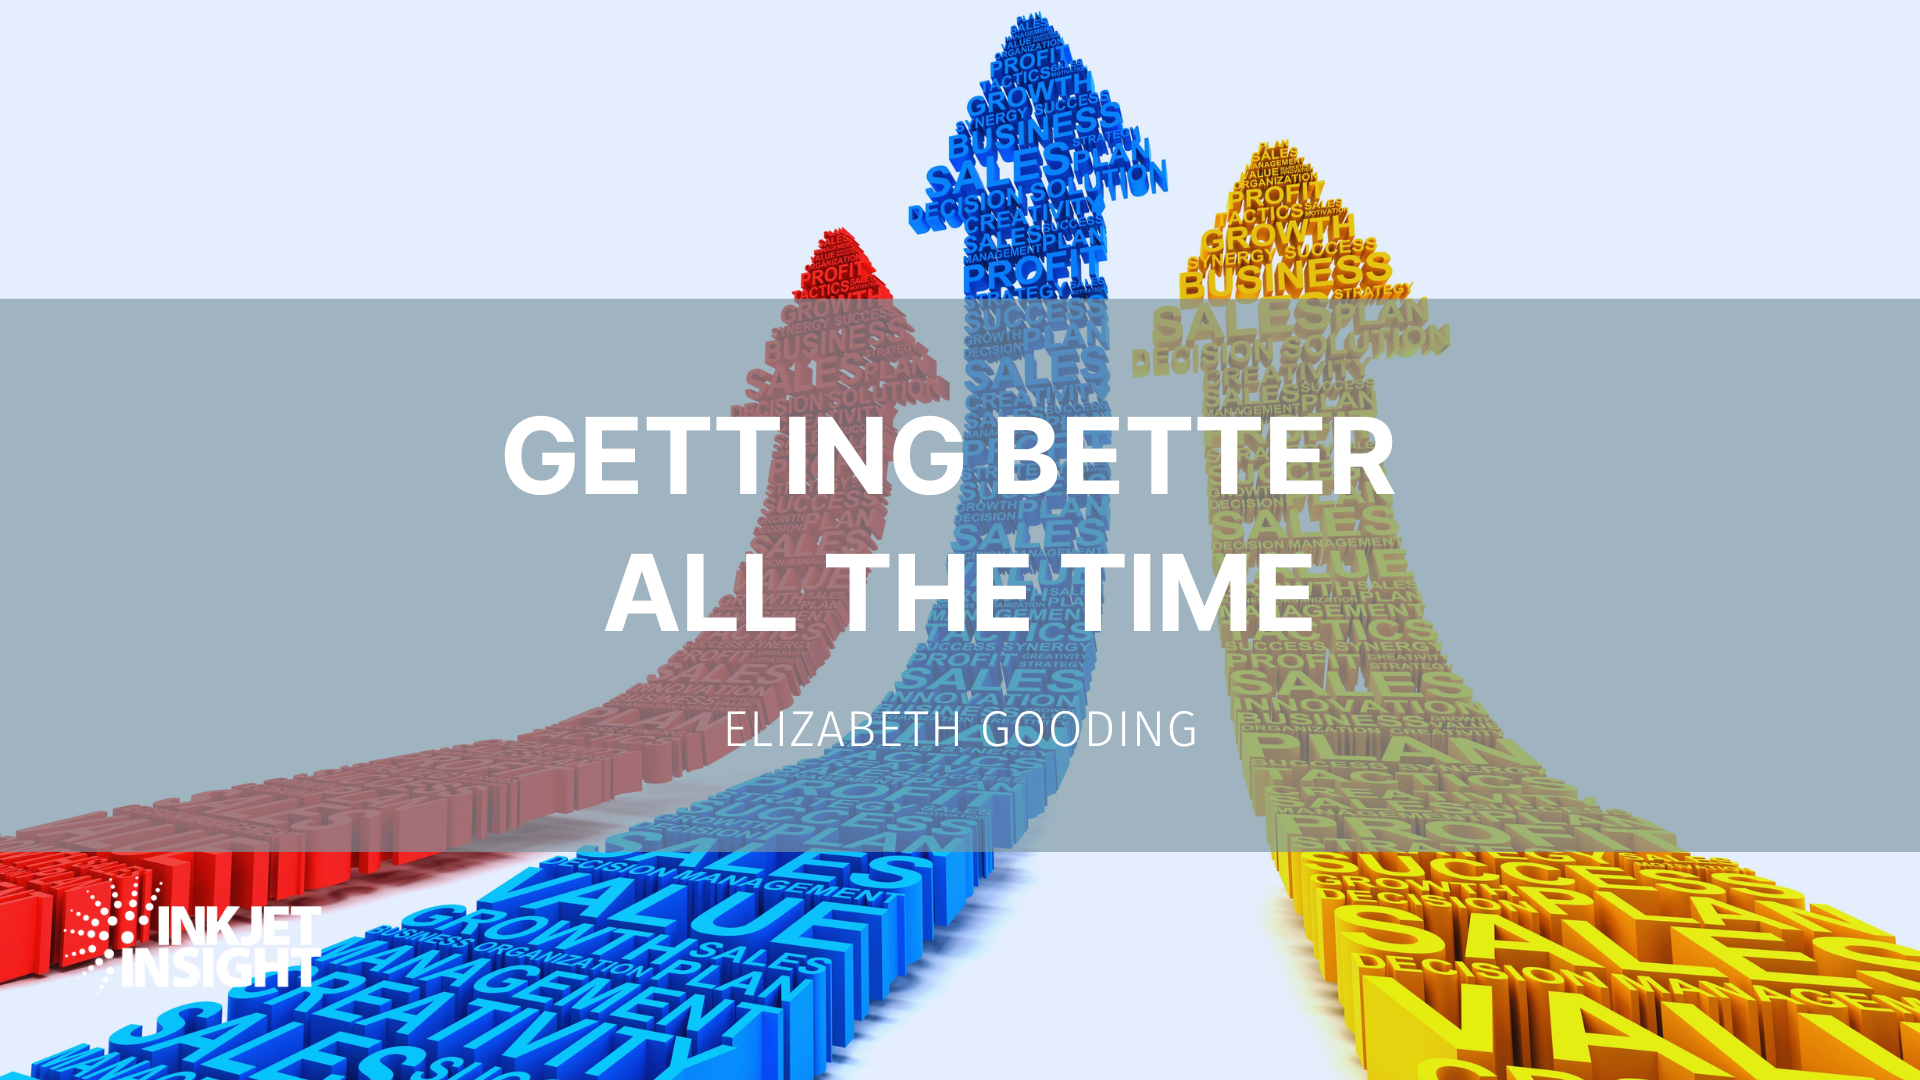 Featured image for “Getting Better all the Time”